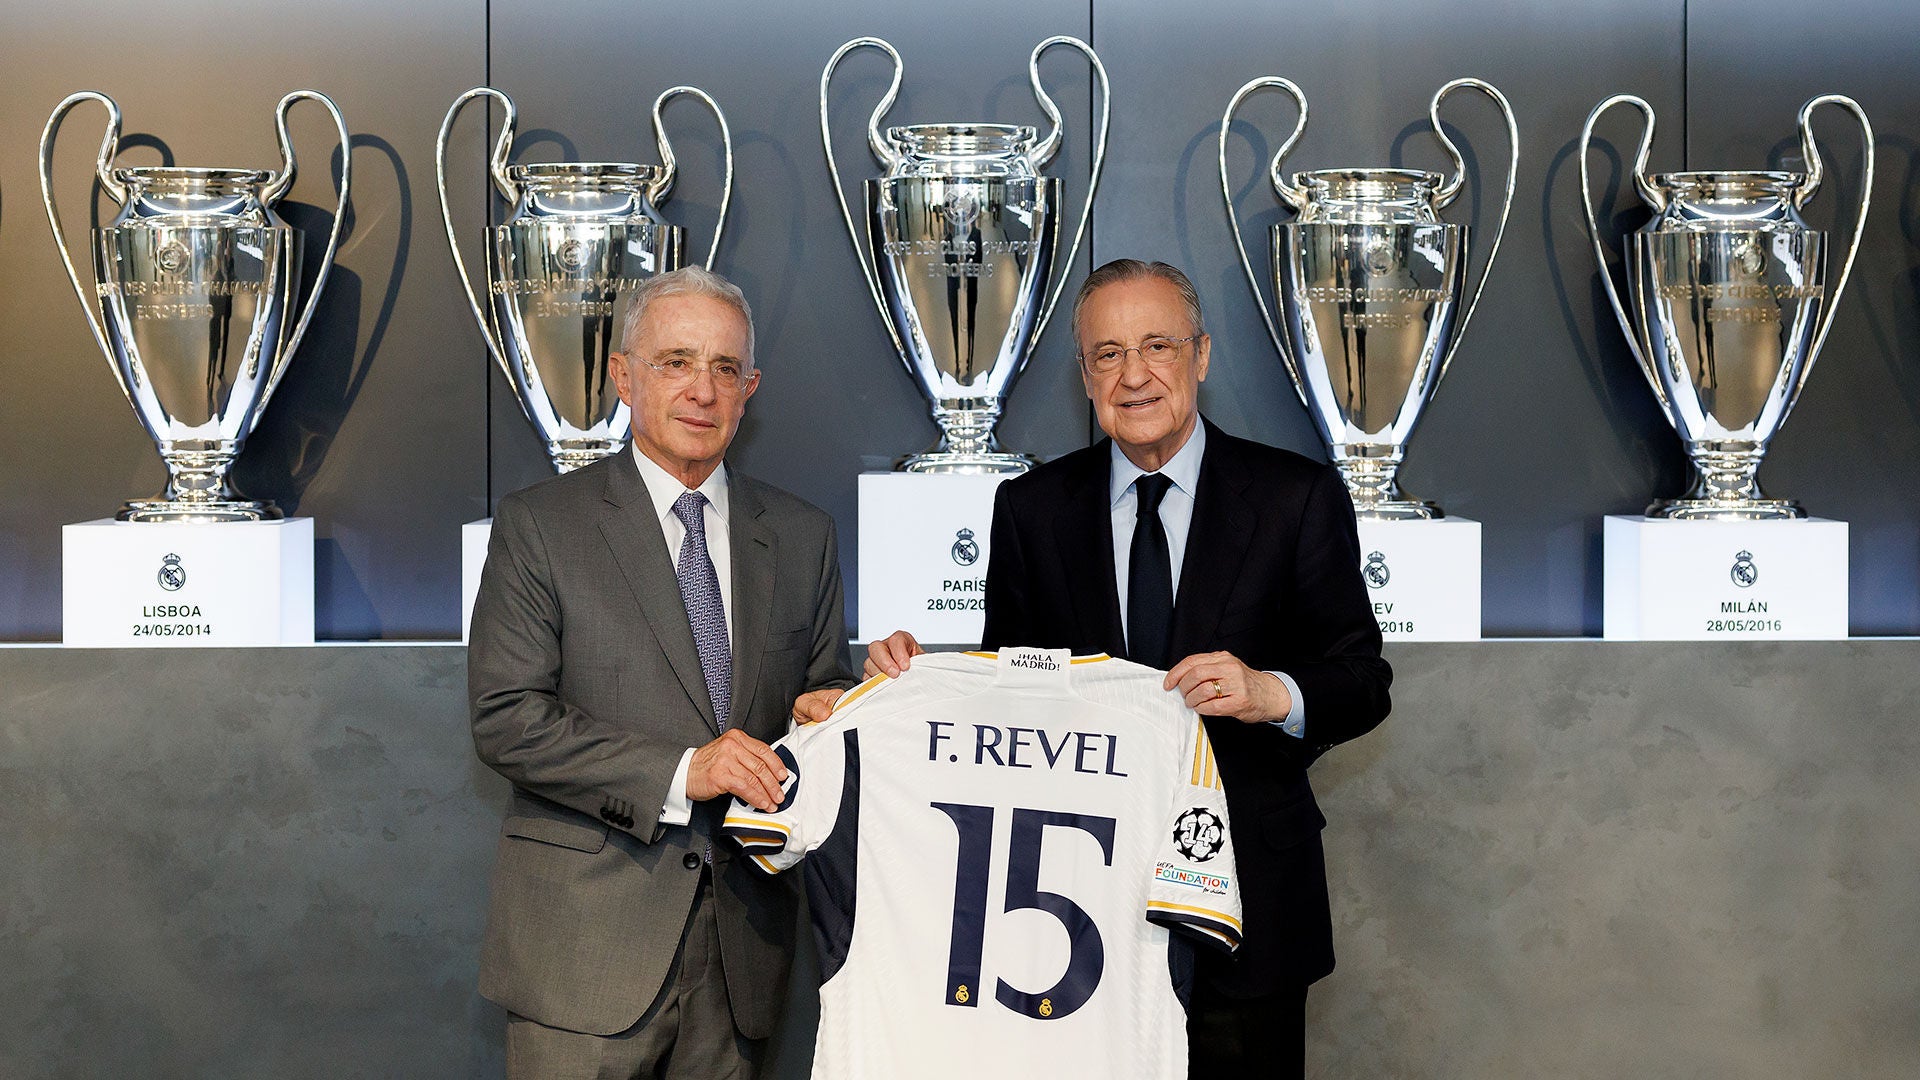 The Real Madrid Foundation and the Revel Foundation have renewed their partnership in Colombia